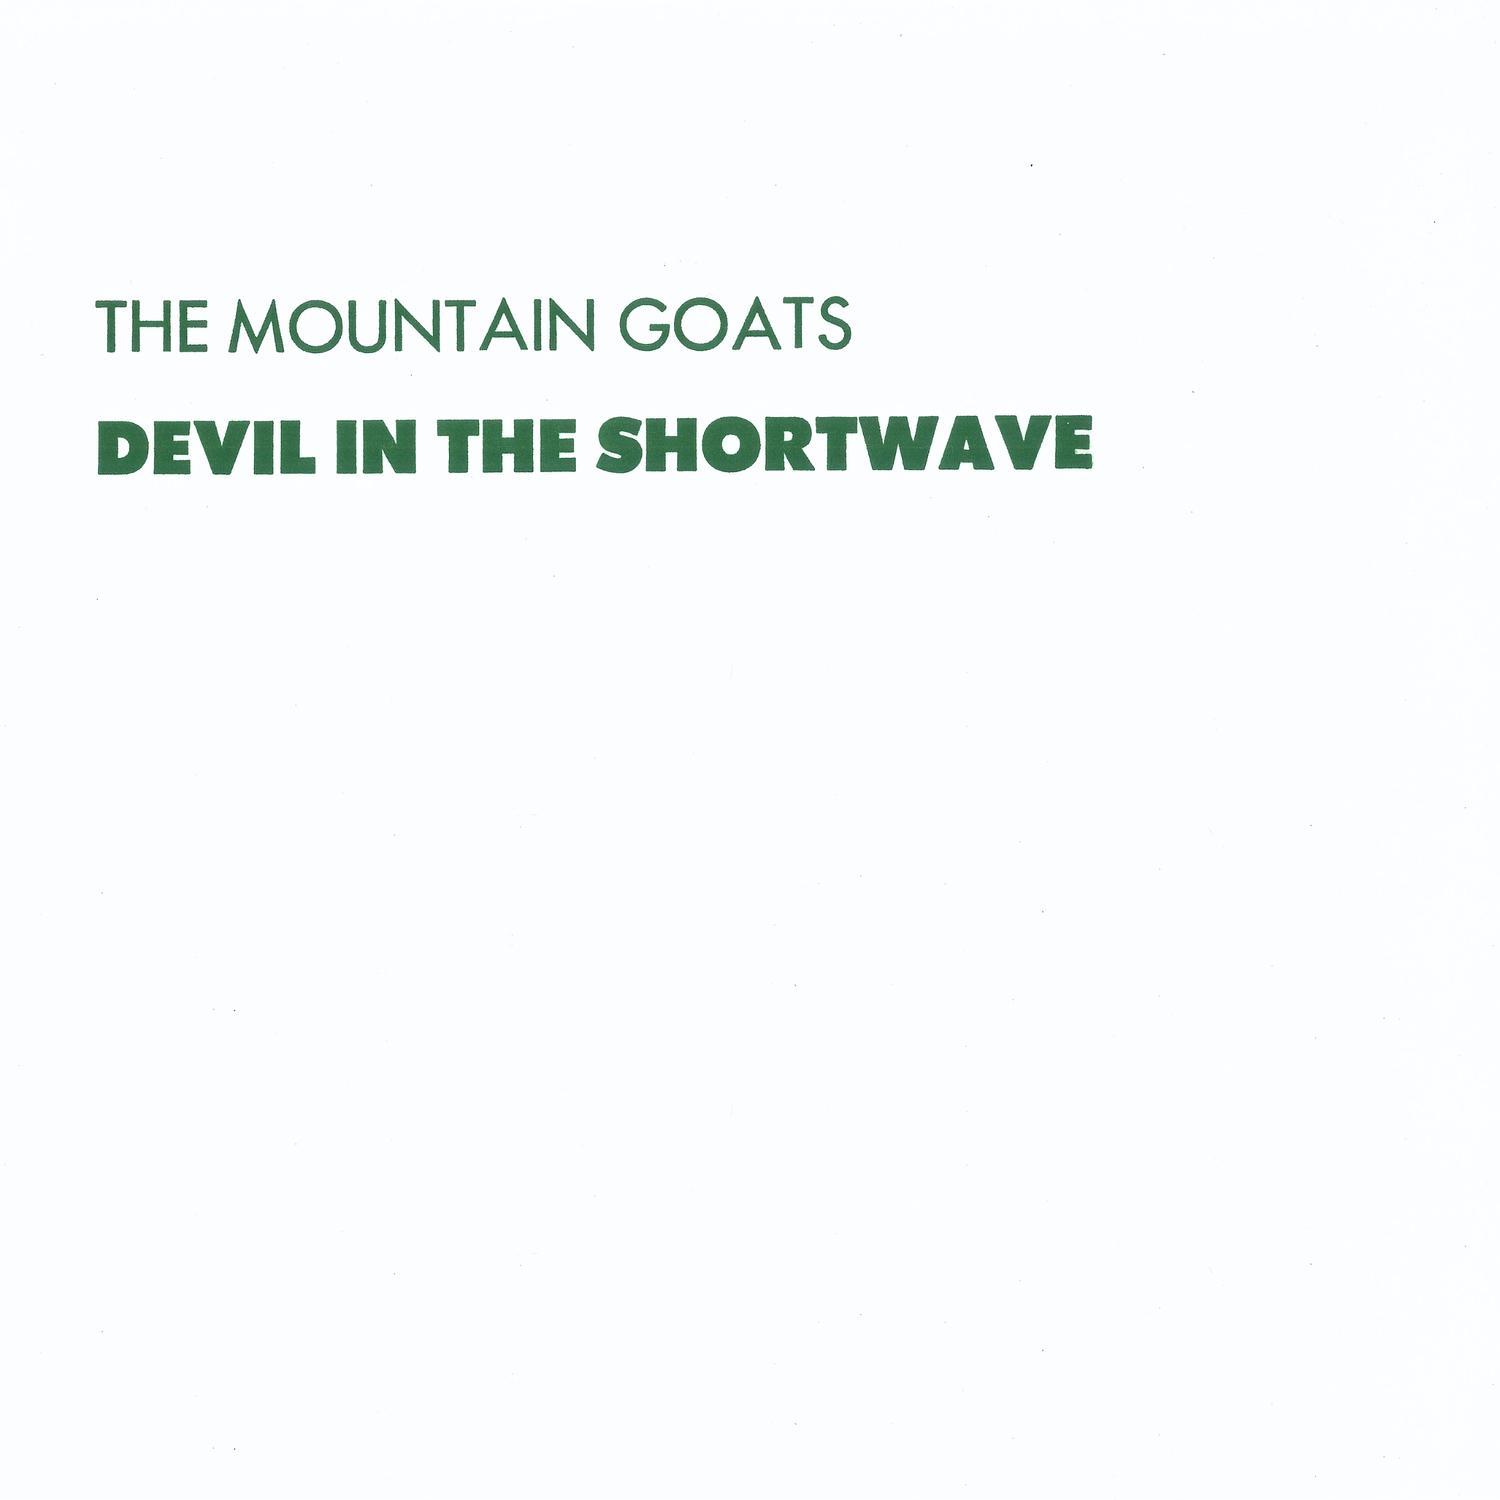 The Mountain Goats - Dirty Old Town